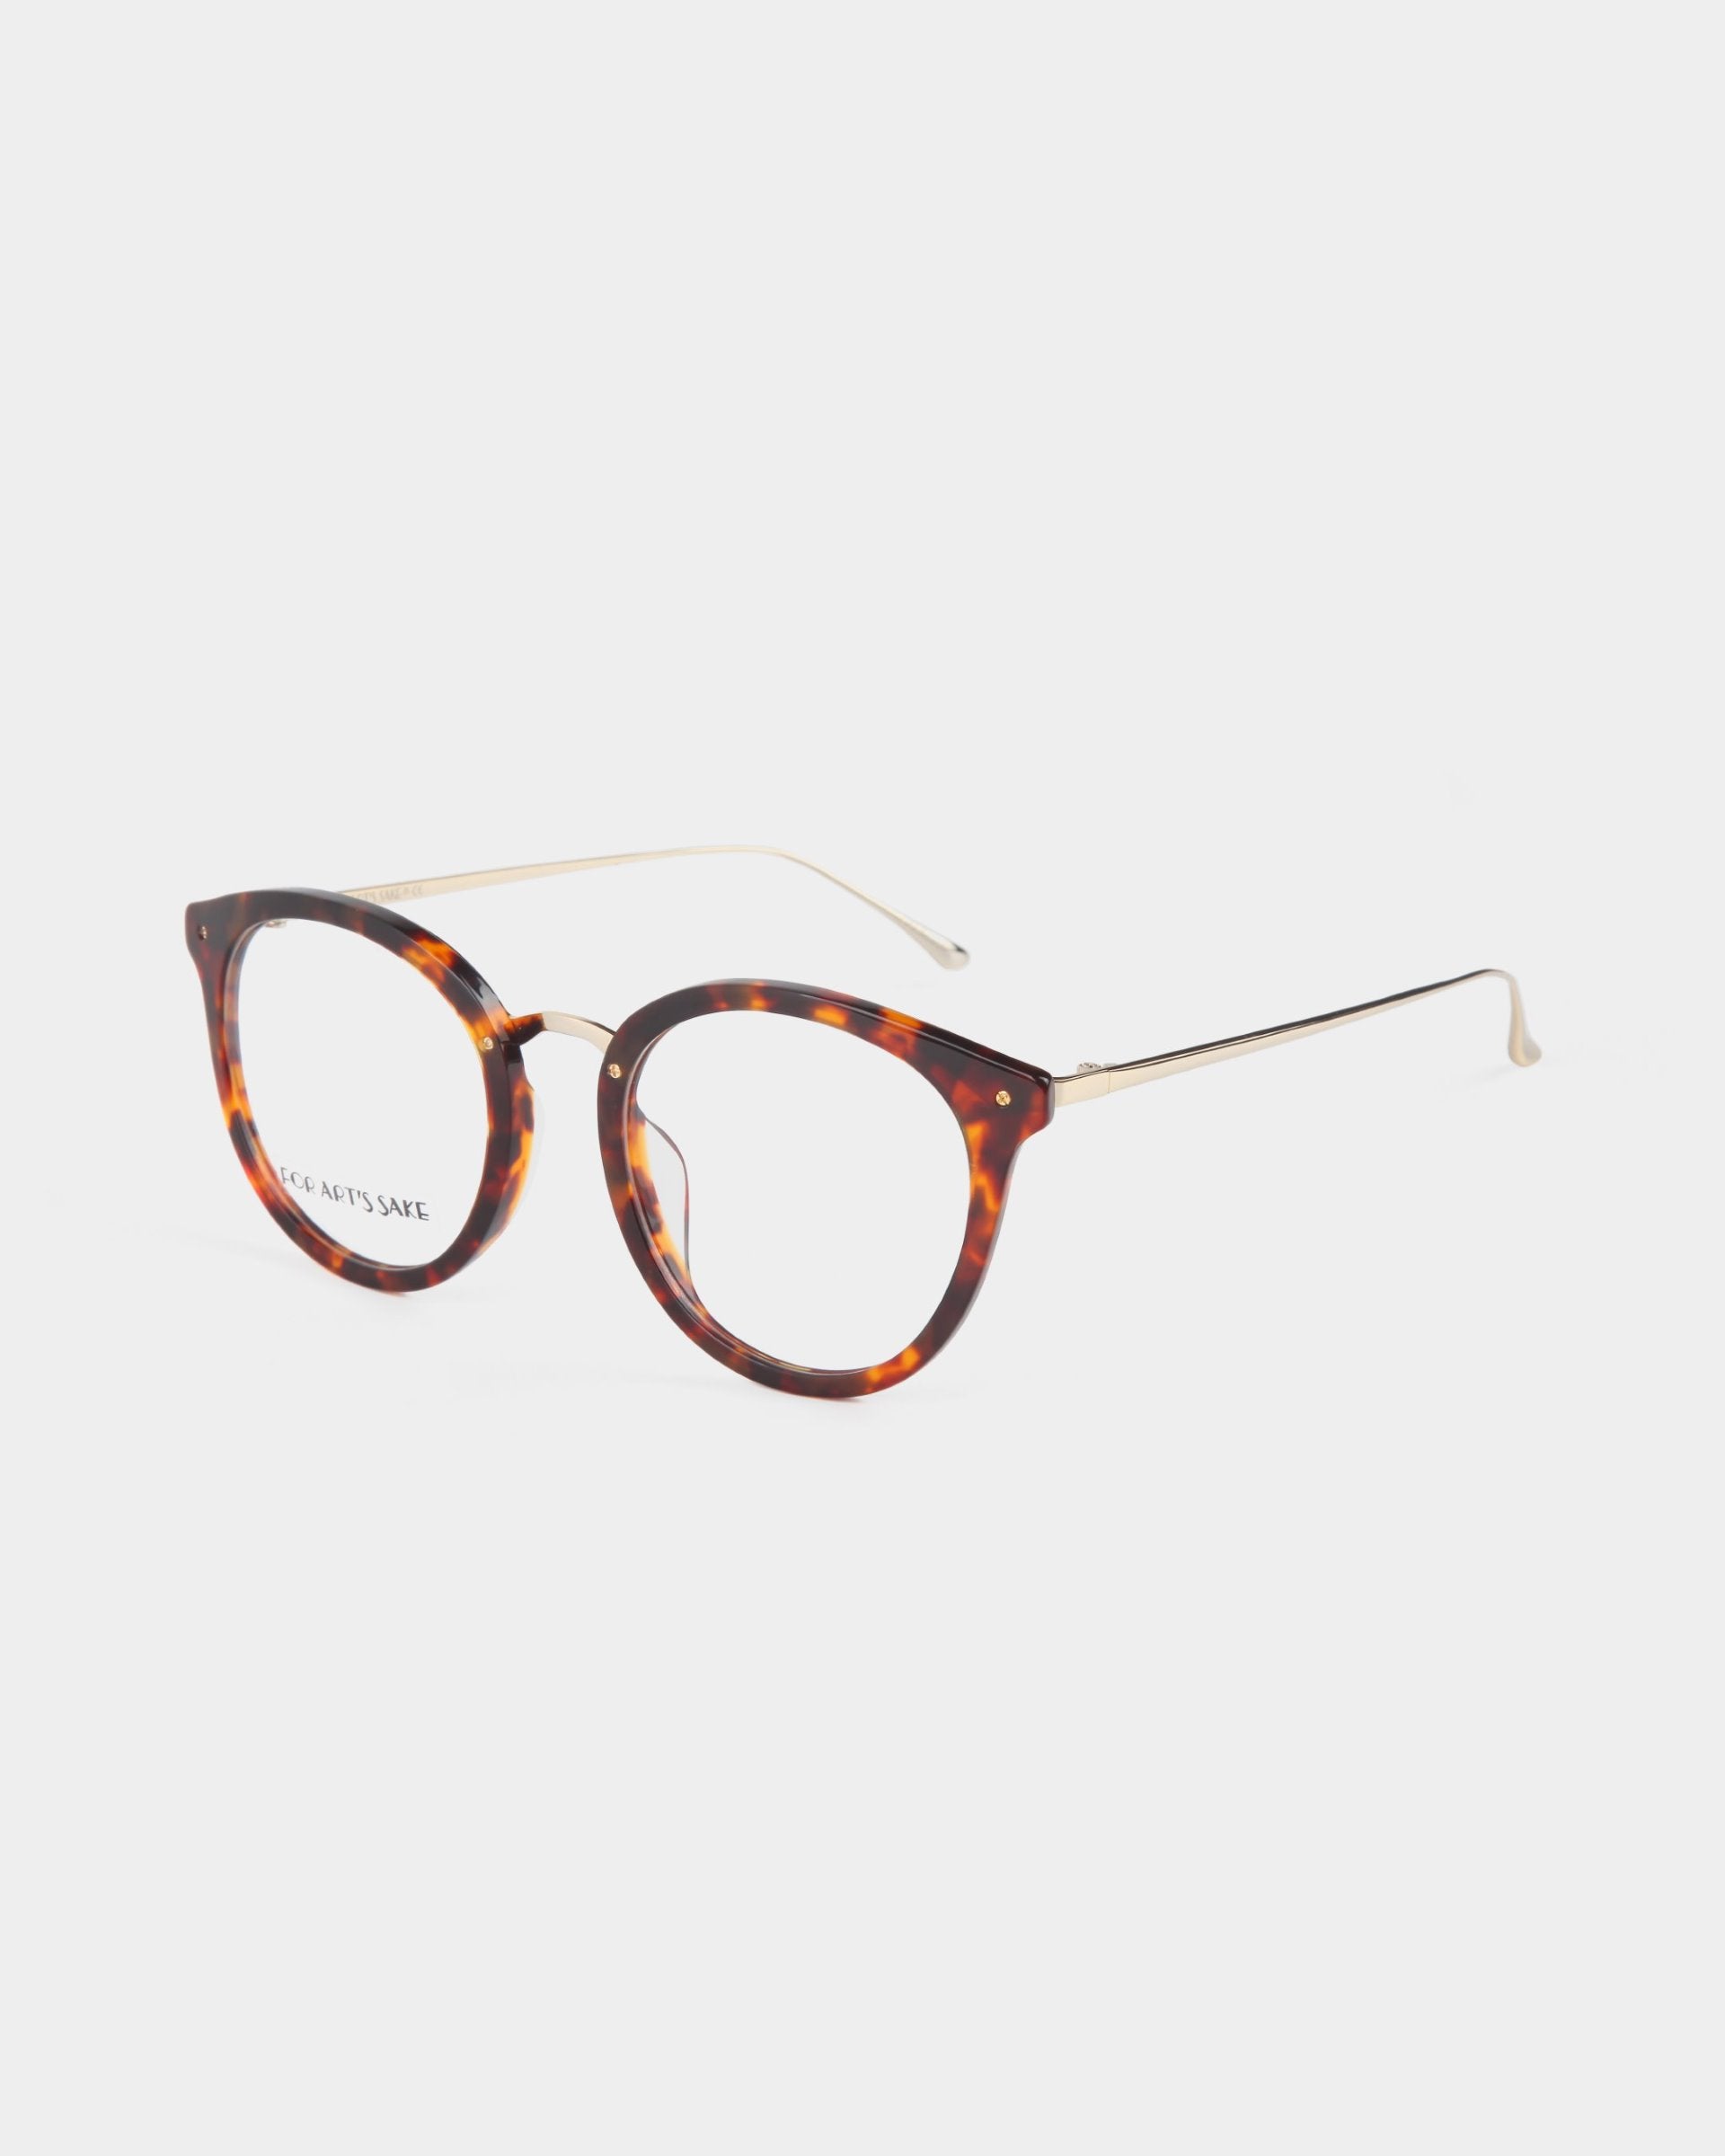 A pair of Jackie eyeglasses by For Art&#39;s Sake® with round tortoiseshell frames and slender gold metal temples. The tips of the temples are curved slightly for a comfortable fit. Featuring UV protection lenses, a small logo is visible on one lens. The overall design is stylish and modern.